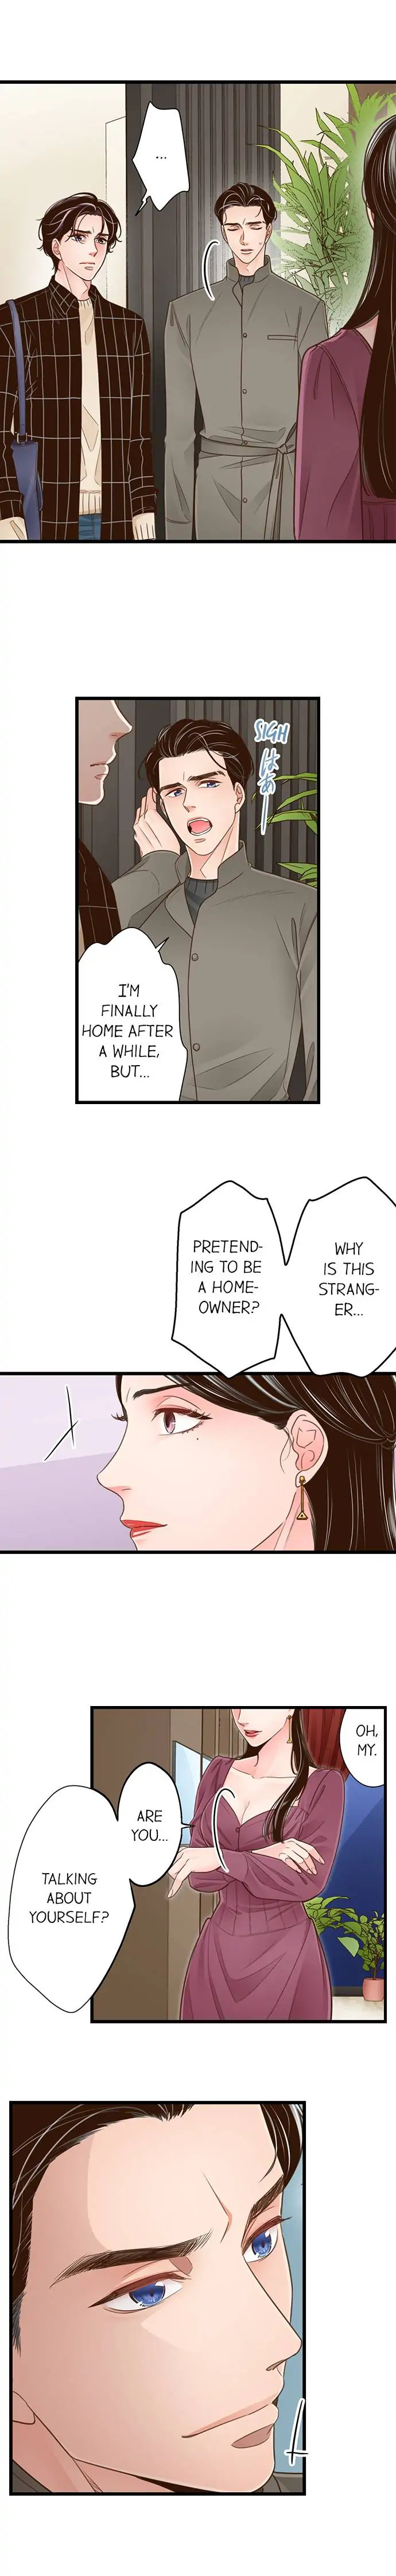 Yanagihara Is a Sex Addict - Chapter 160 Page 2